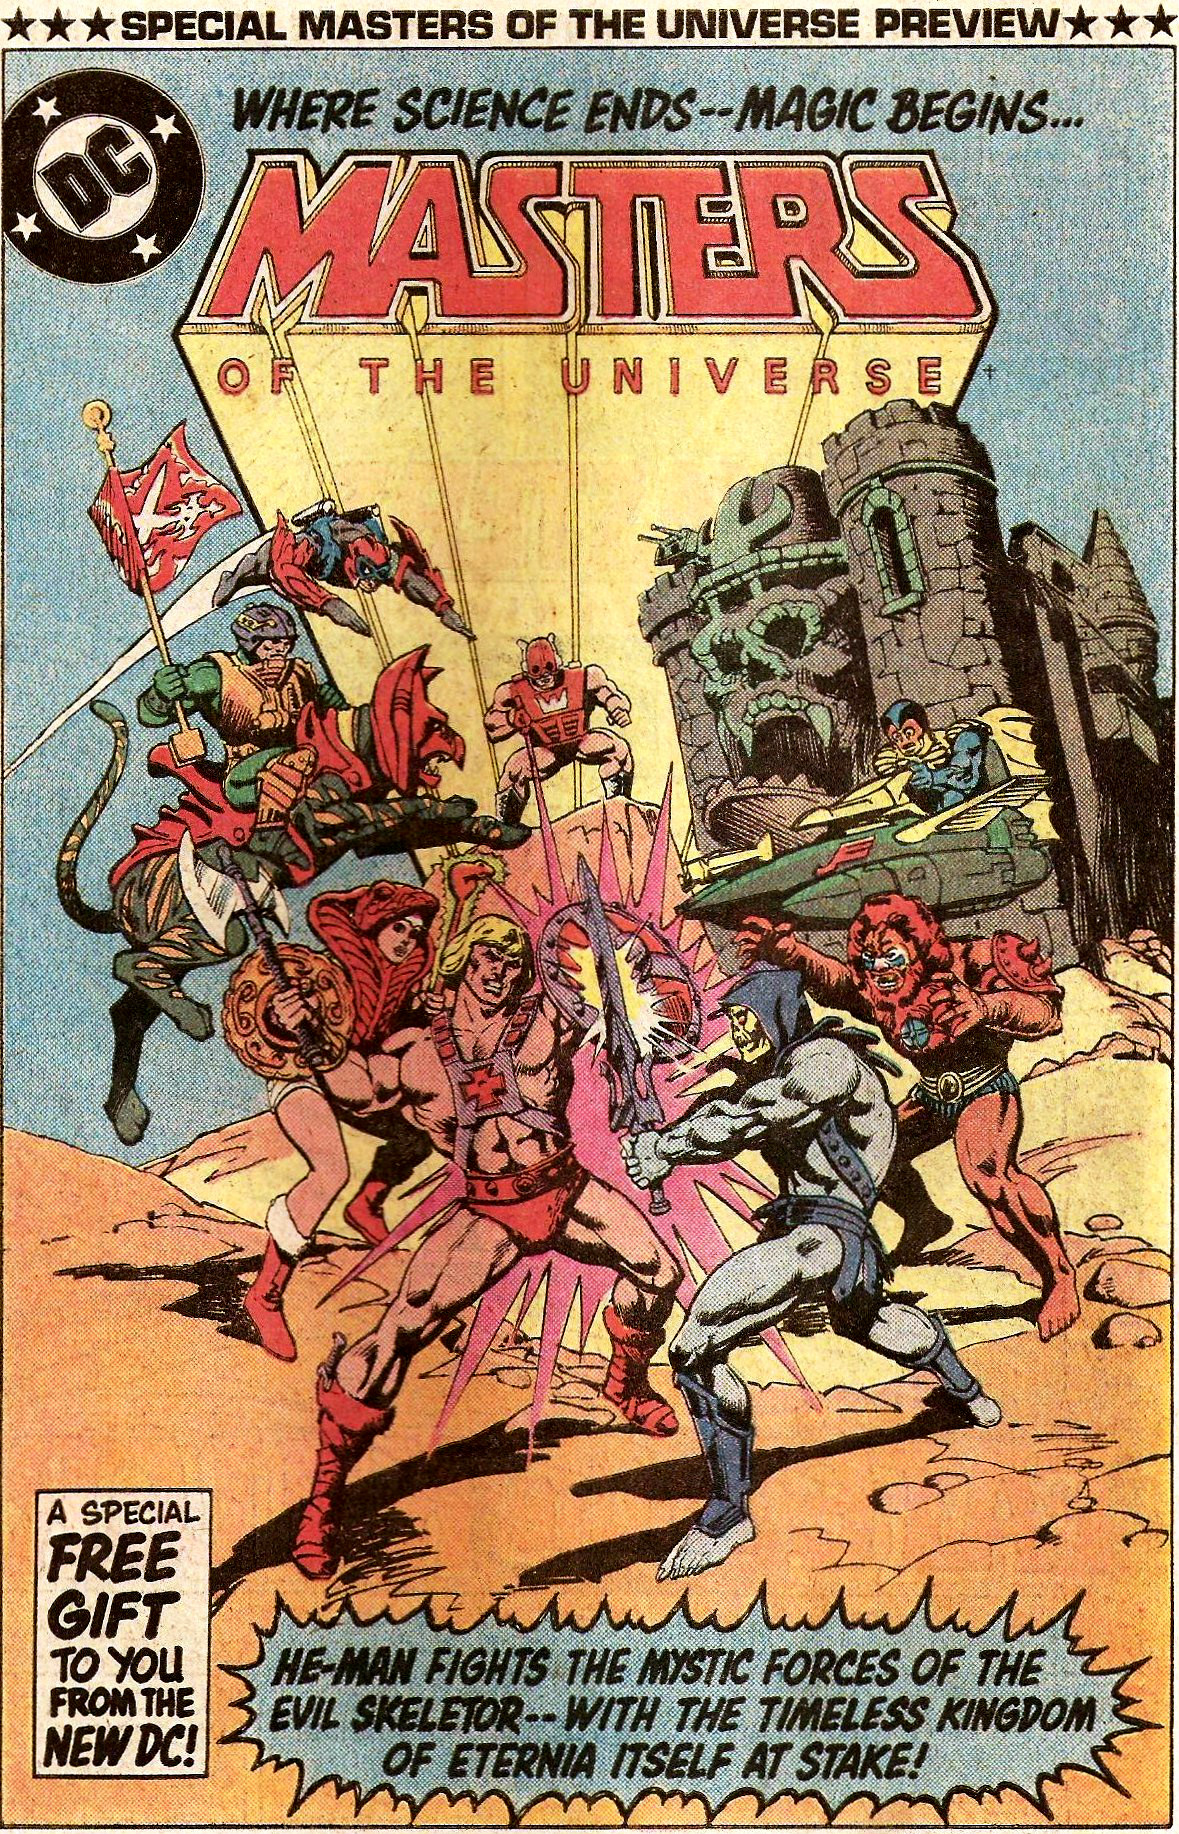 From Masters of the Universe Preview (1982)